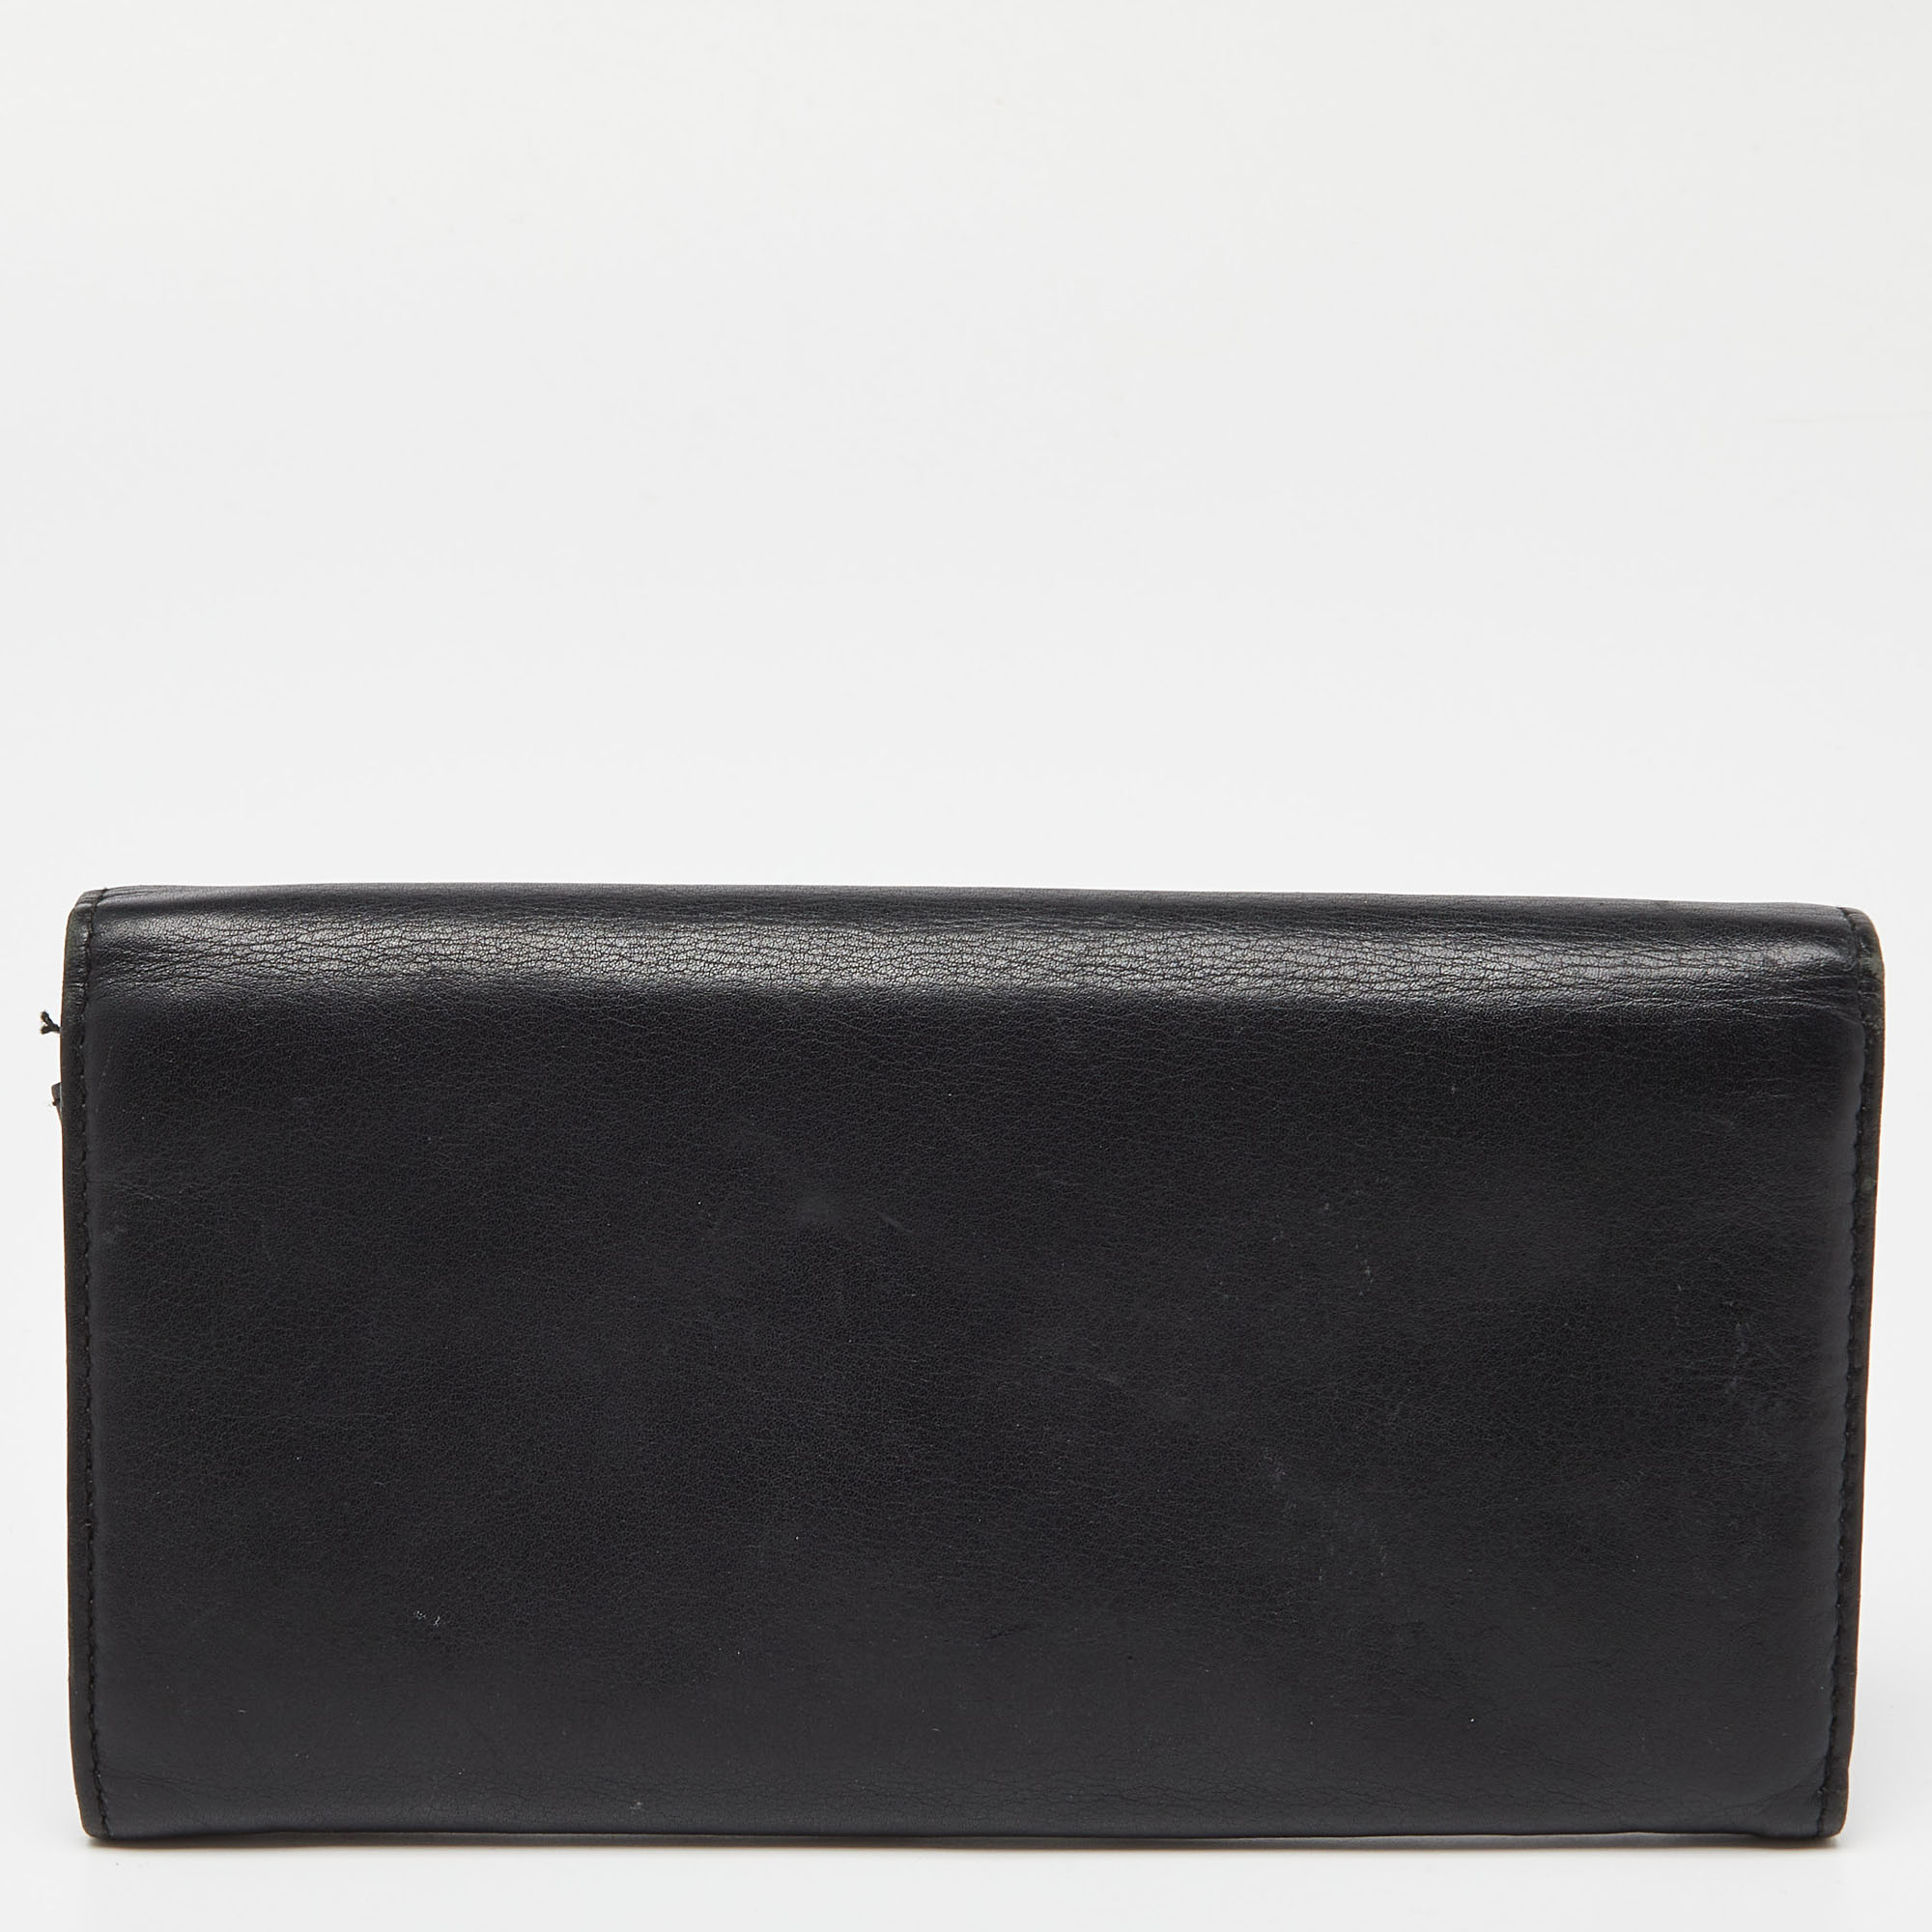 Dior Black Leather Flap Continental Wallet